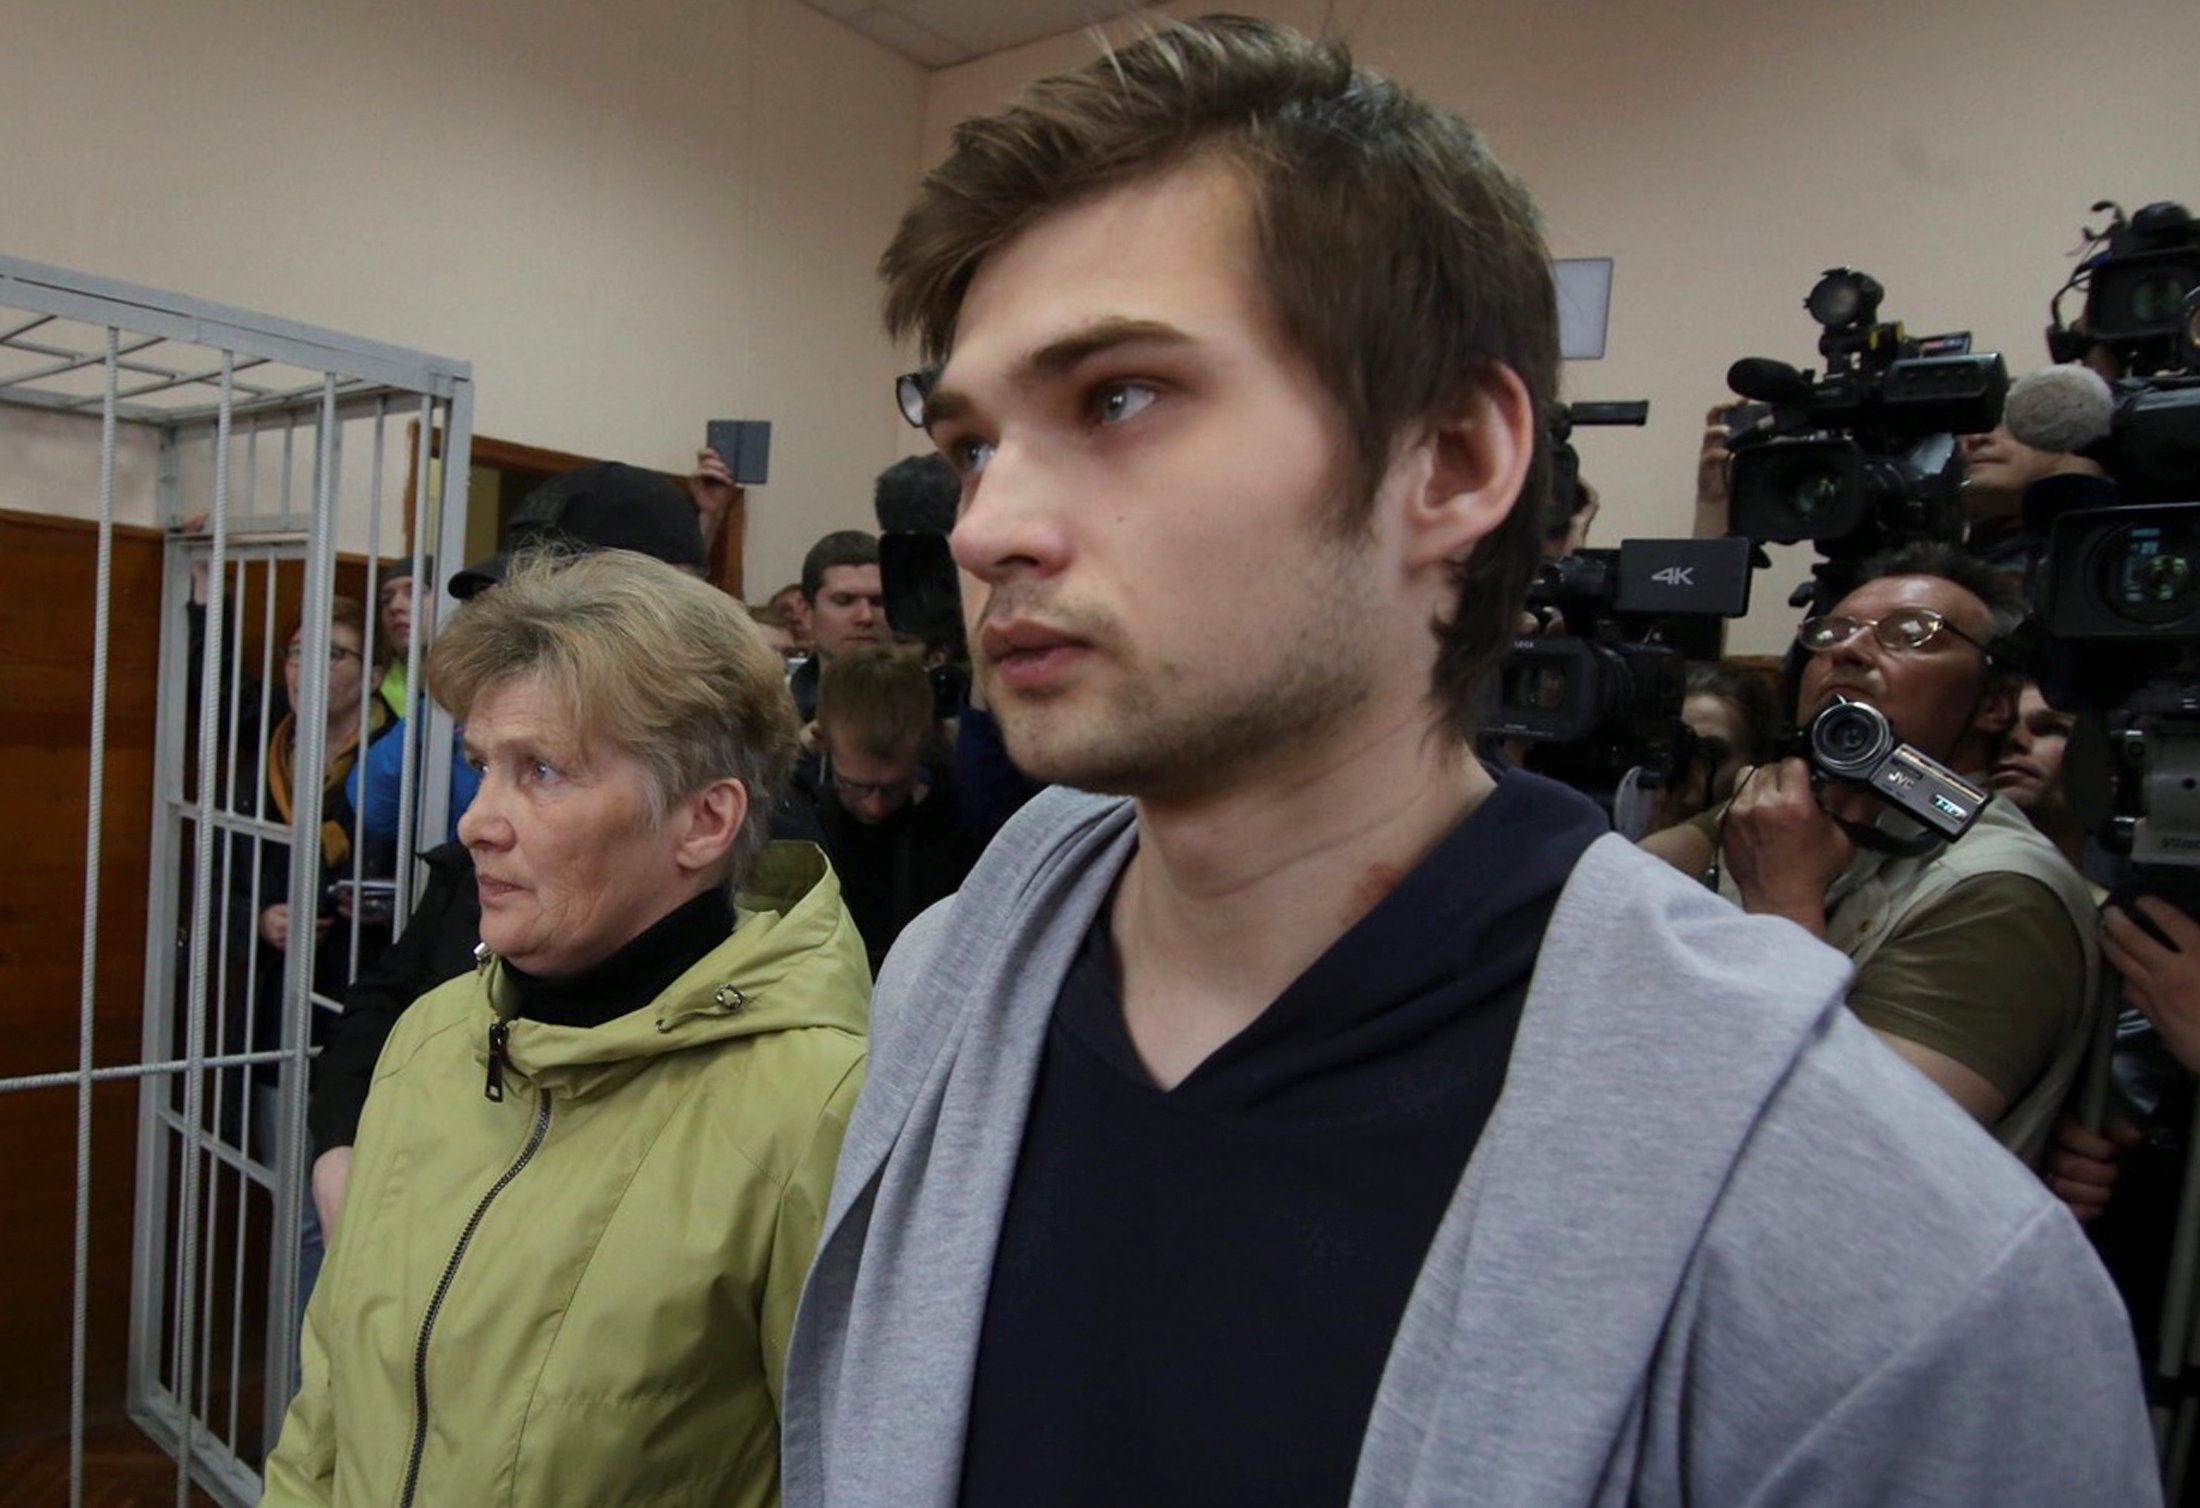 Ruslan Sokolovsky, a blogger who is accused by a state prosecutor for playing Pokemon Go inside an Orthodox church, appears with his mother Yelena Chingina in a court during his sentencing in Yekaterinburg, Russia May 11, 2017. u00e2u20acu201d Reuters pic